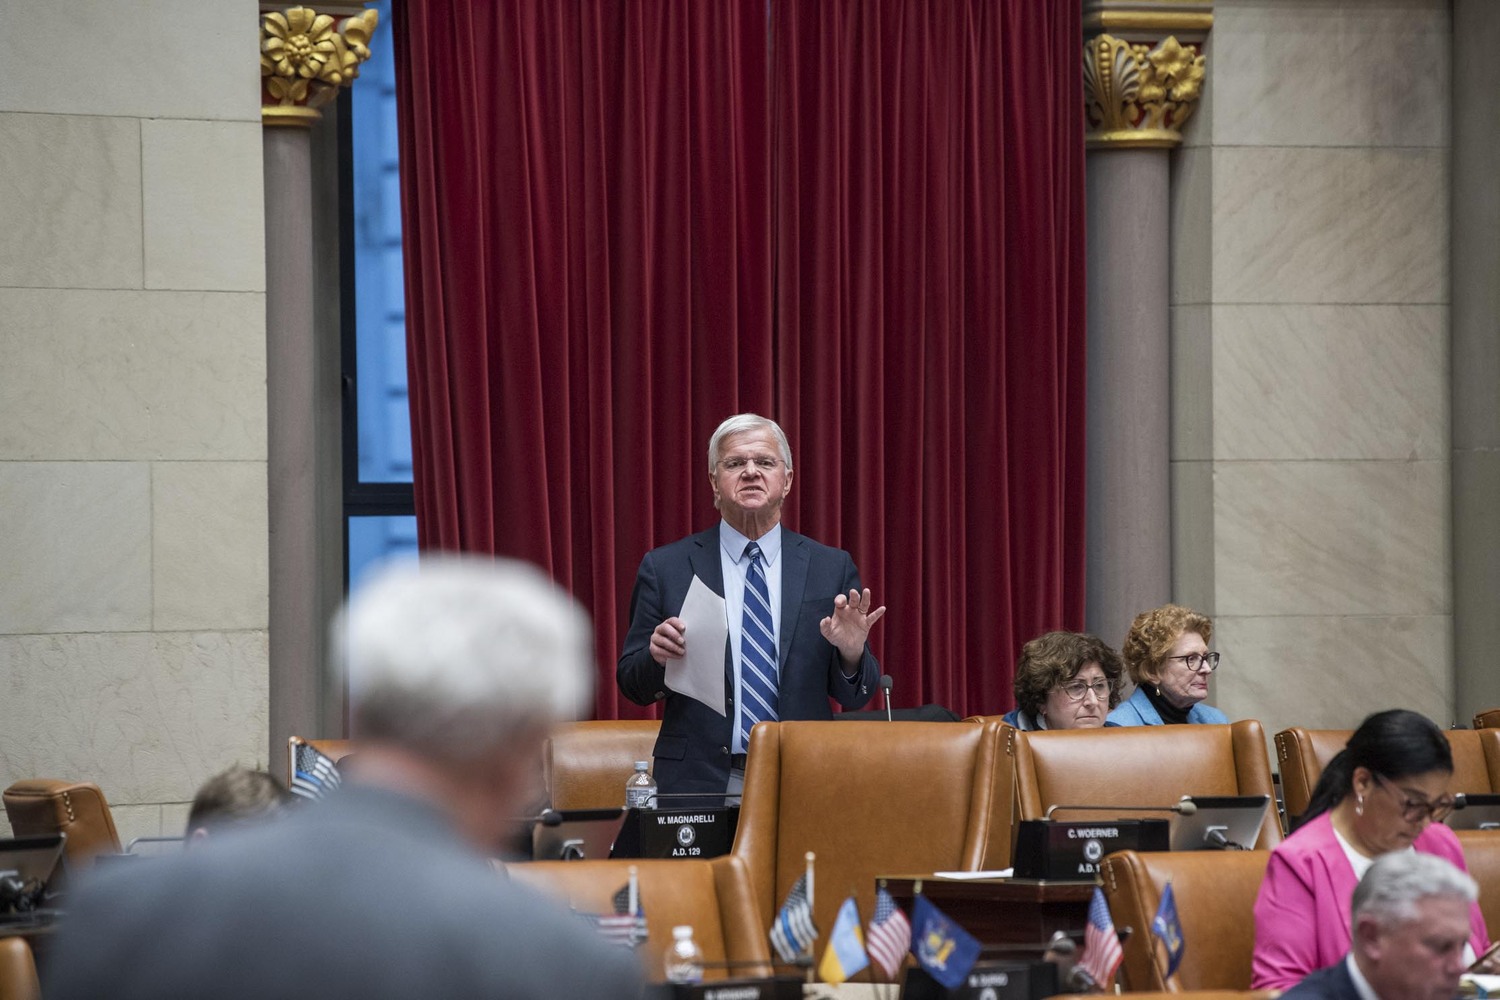 New York State Assemblyman Fred W. Thiele Jr., at work in Albany recently. Assemblyman Thiele confirmed this week that he would not seek another term this November.